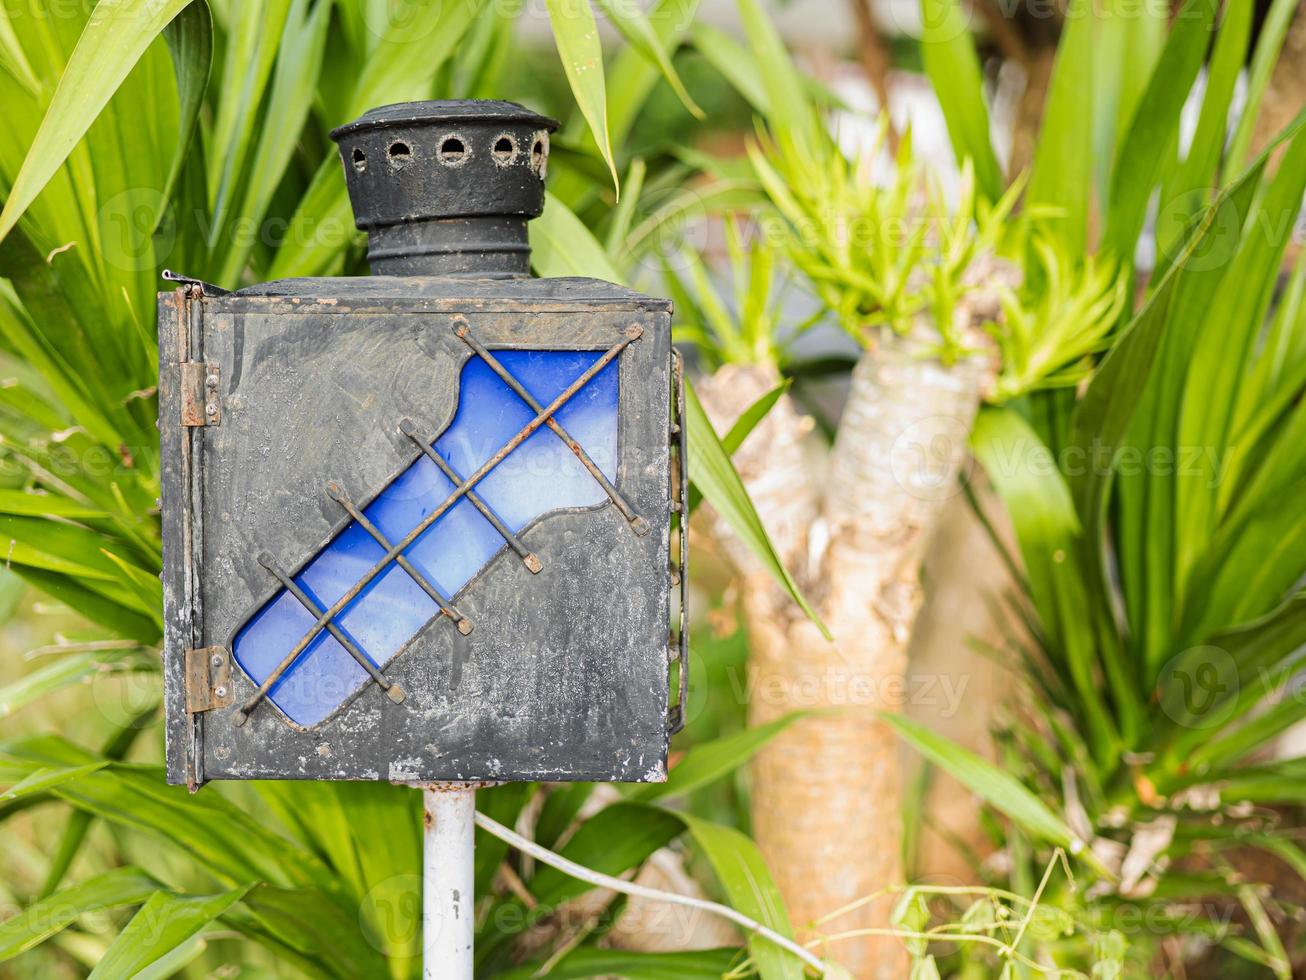 A navigation lamp with arrows to guide the way made of old iron, blue. Located in a public park photo